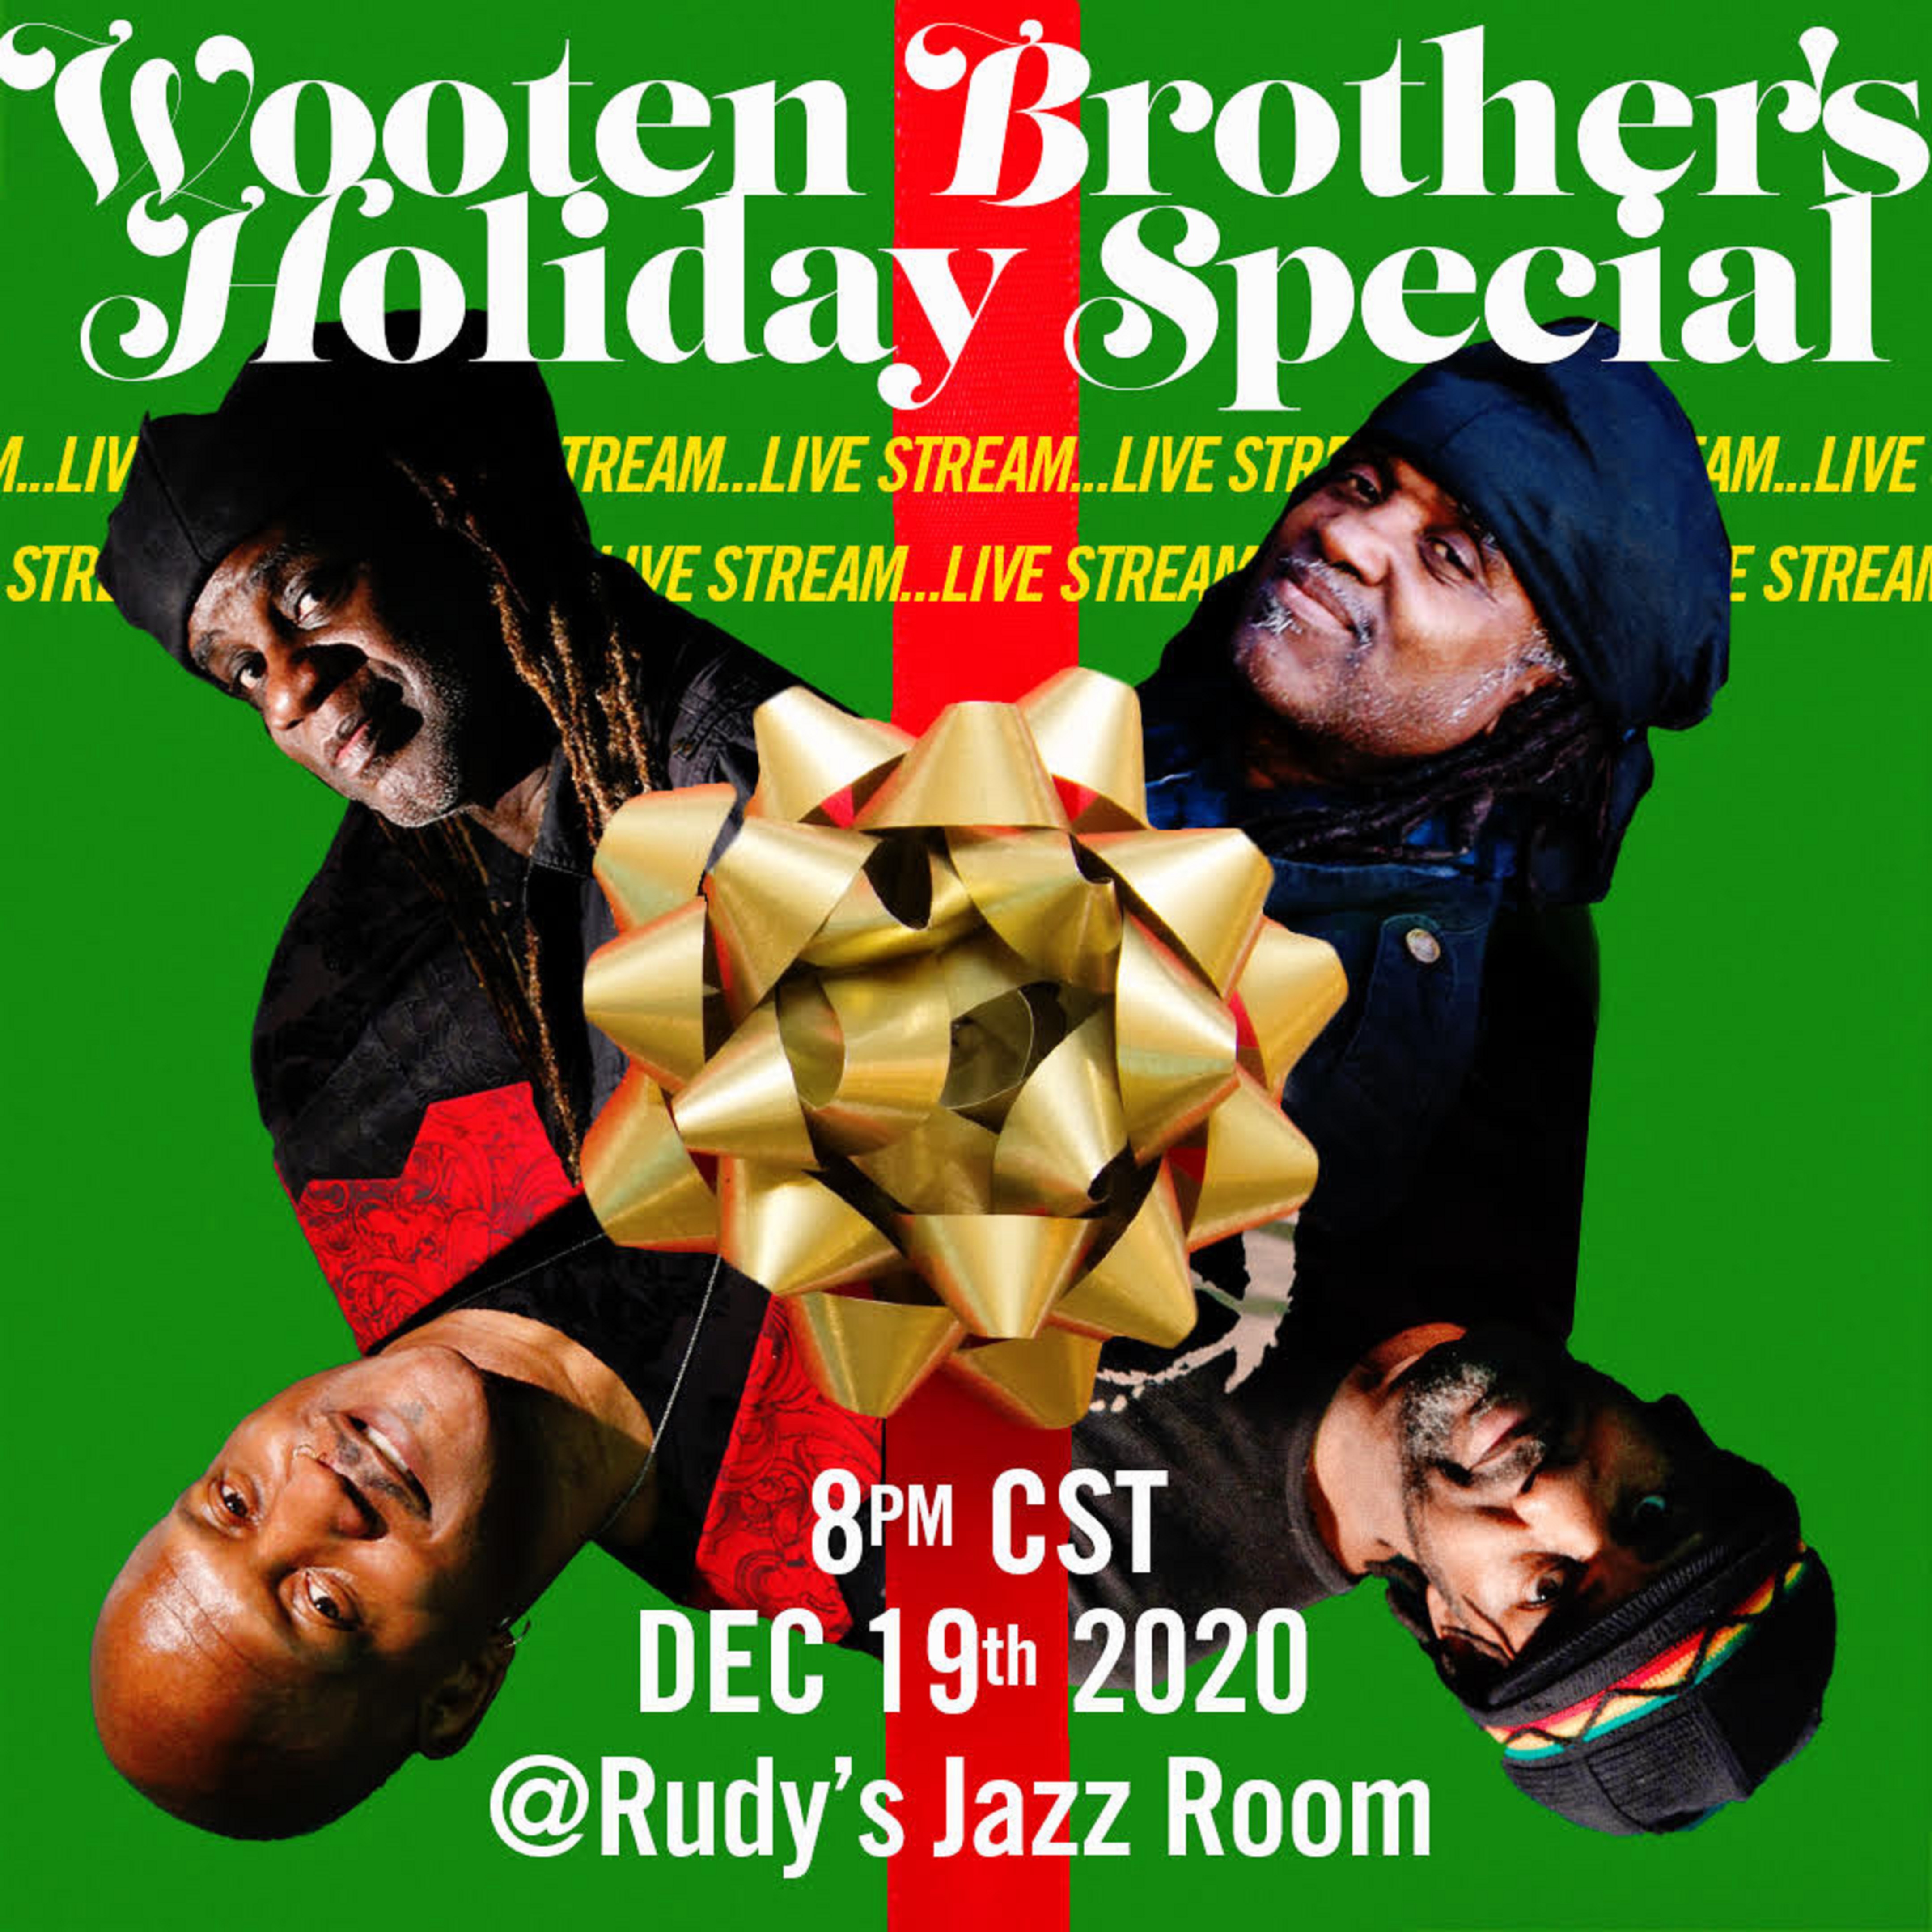 FREE Livestream Wooten Brothers Holiday Special